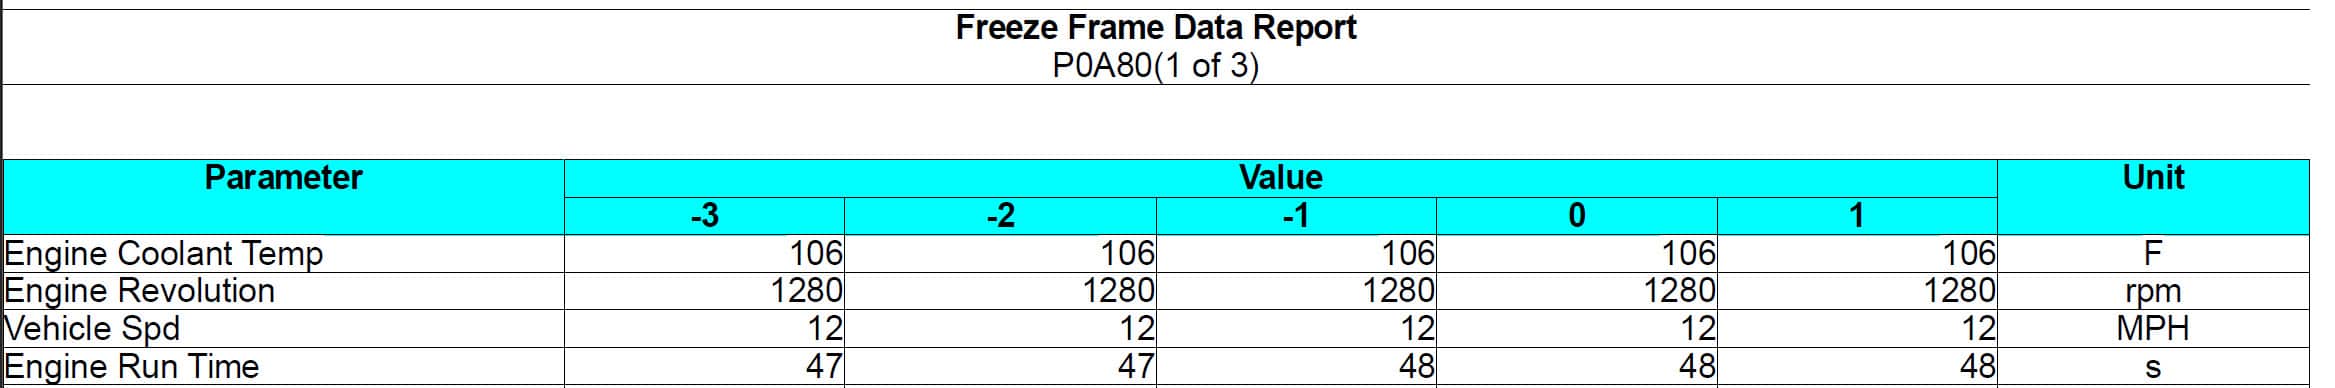 Freeze frame data for P0A80 on a Toyota Prius